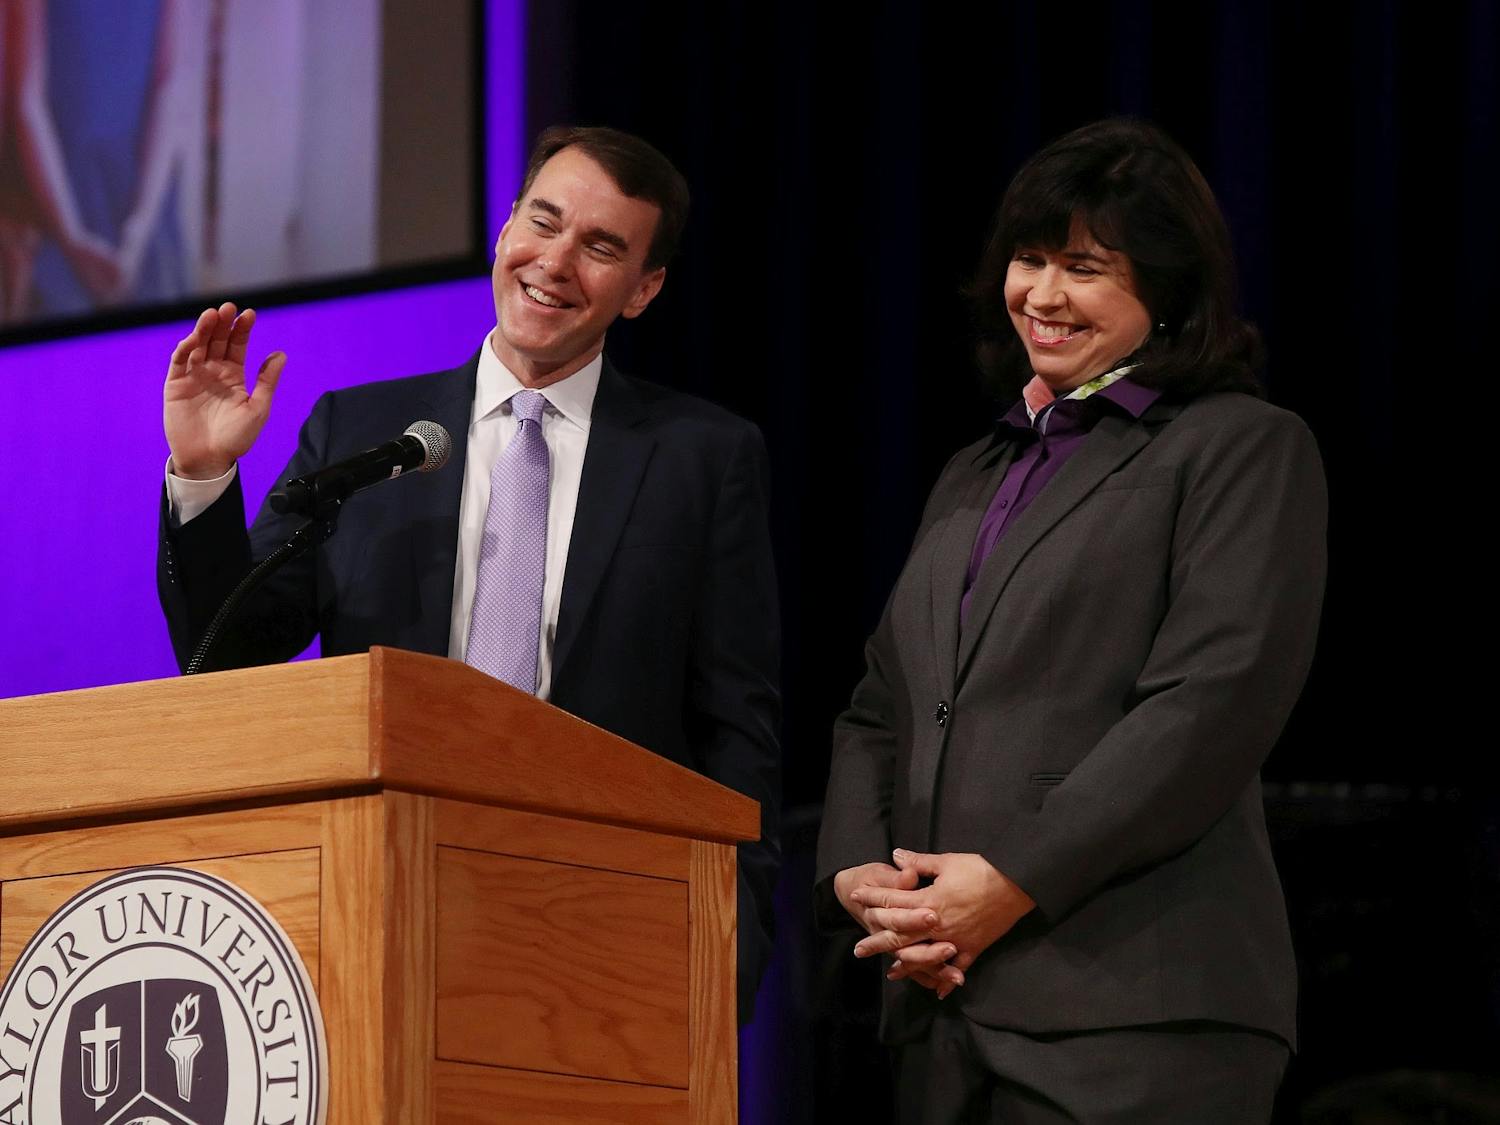 Michael Lindsay and his wife, Rebecca, were introduced to the student body in March. 